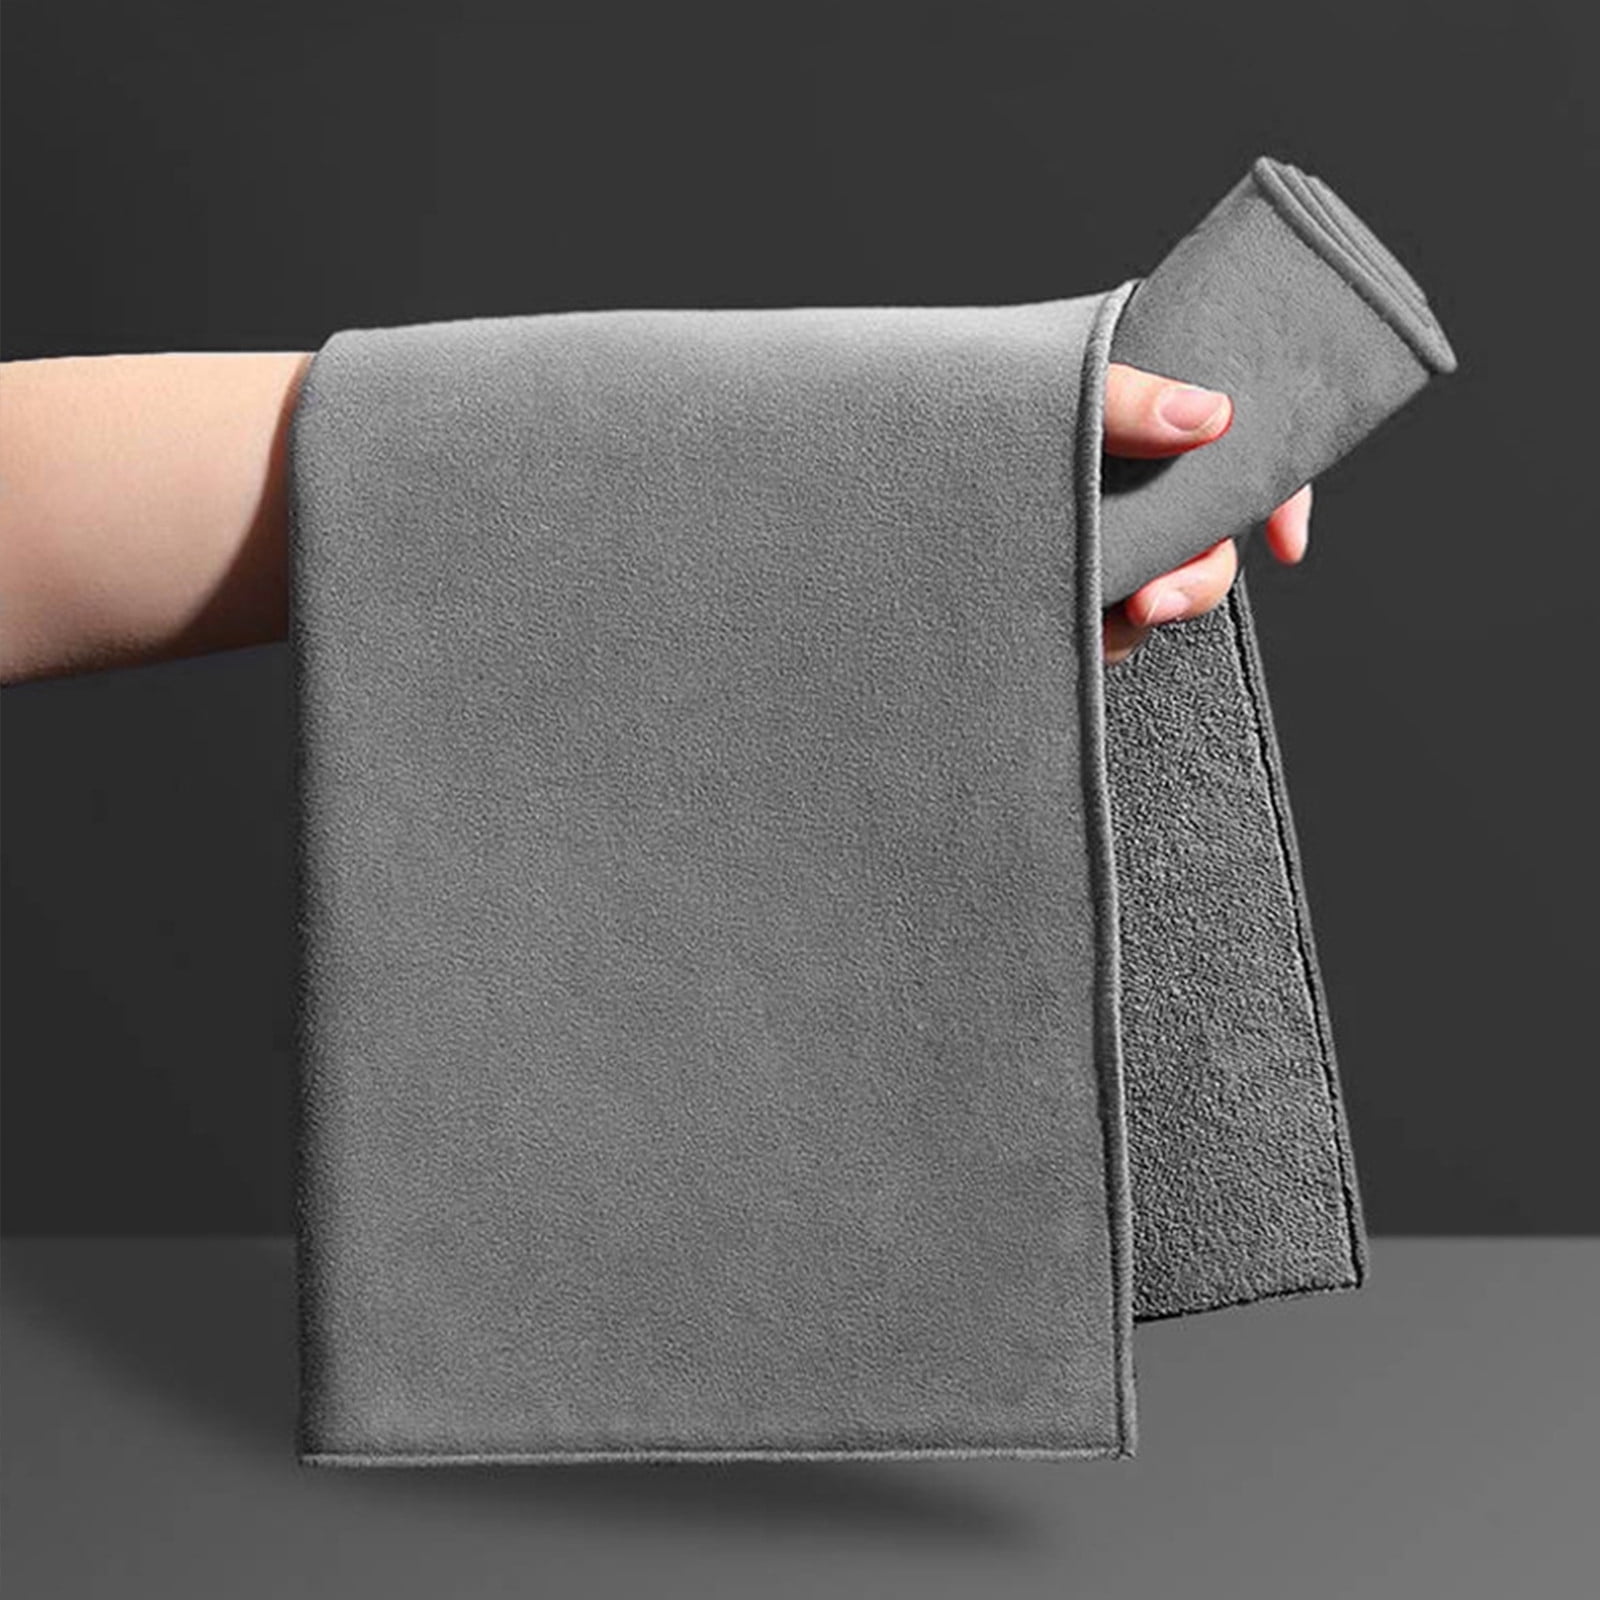 Kehuo Microfiber Screen Cleaning Cloth for Car, Leather Sofa,Electronic ...